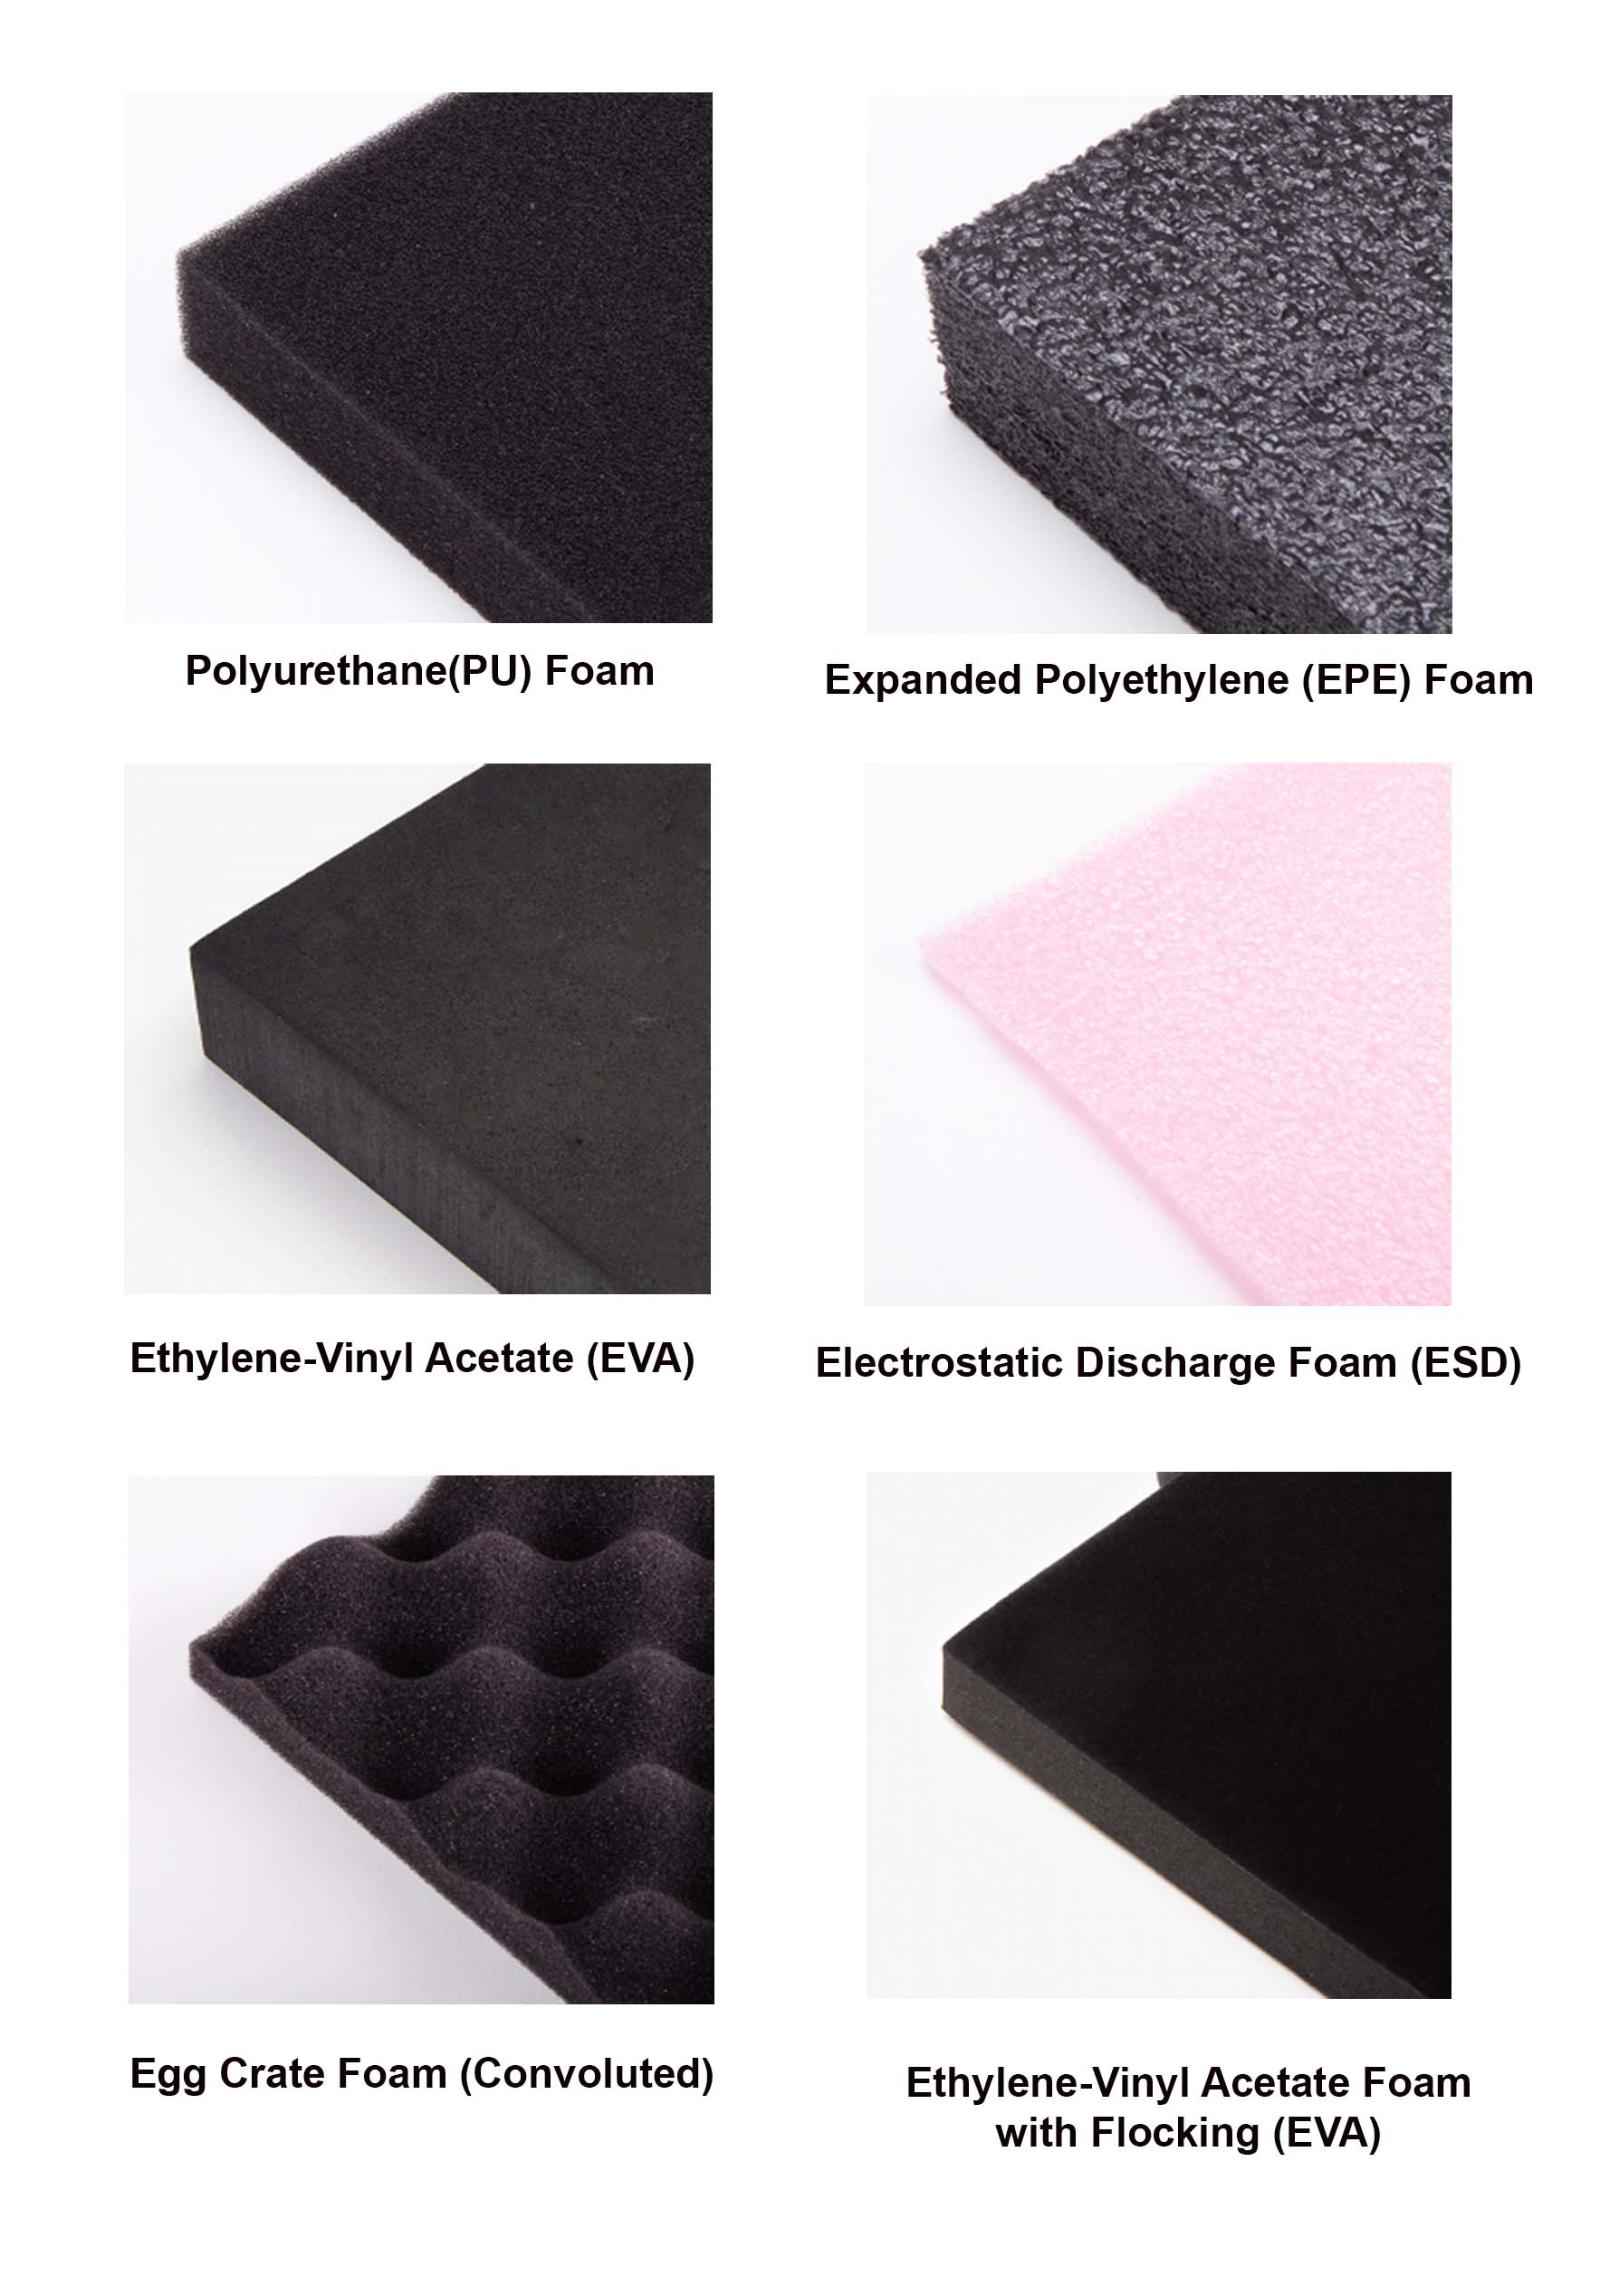 foam types and pictures_.jpg